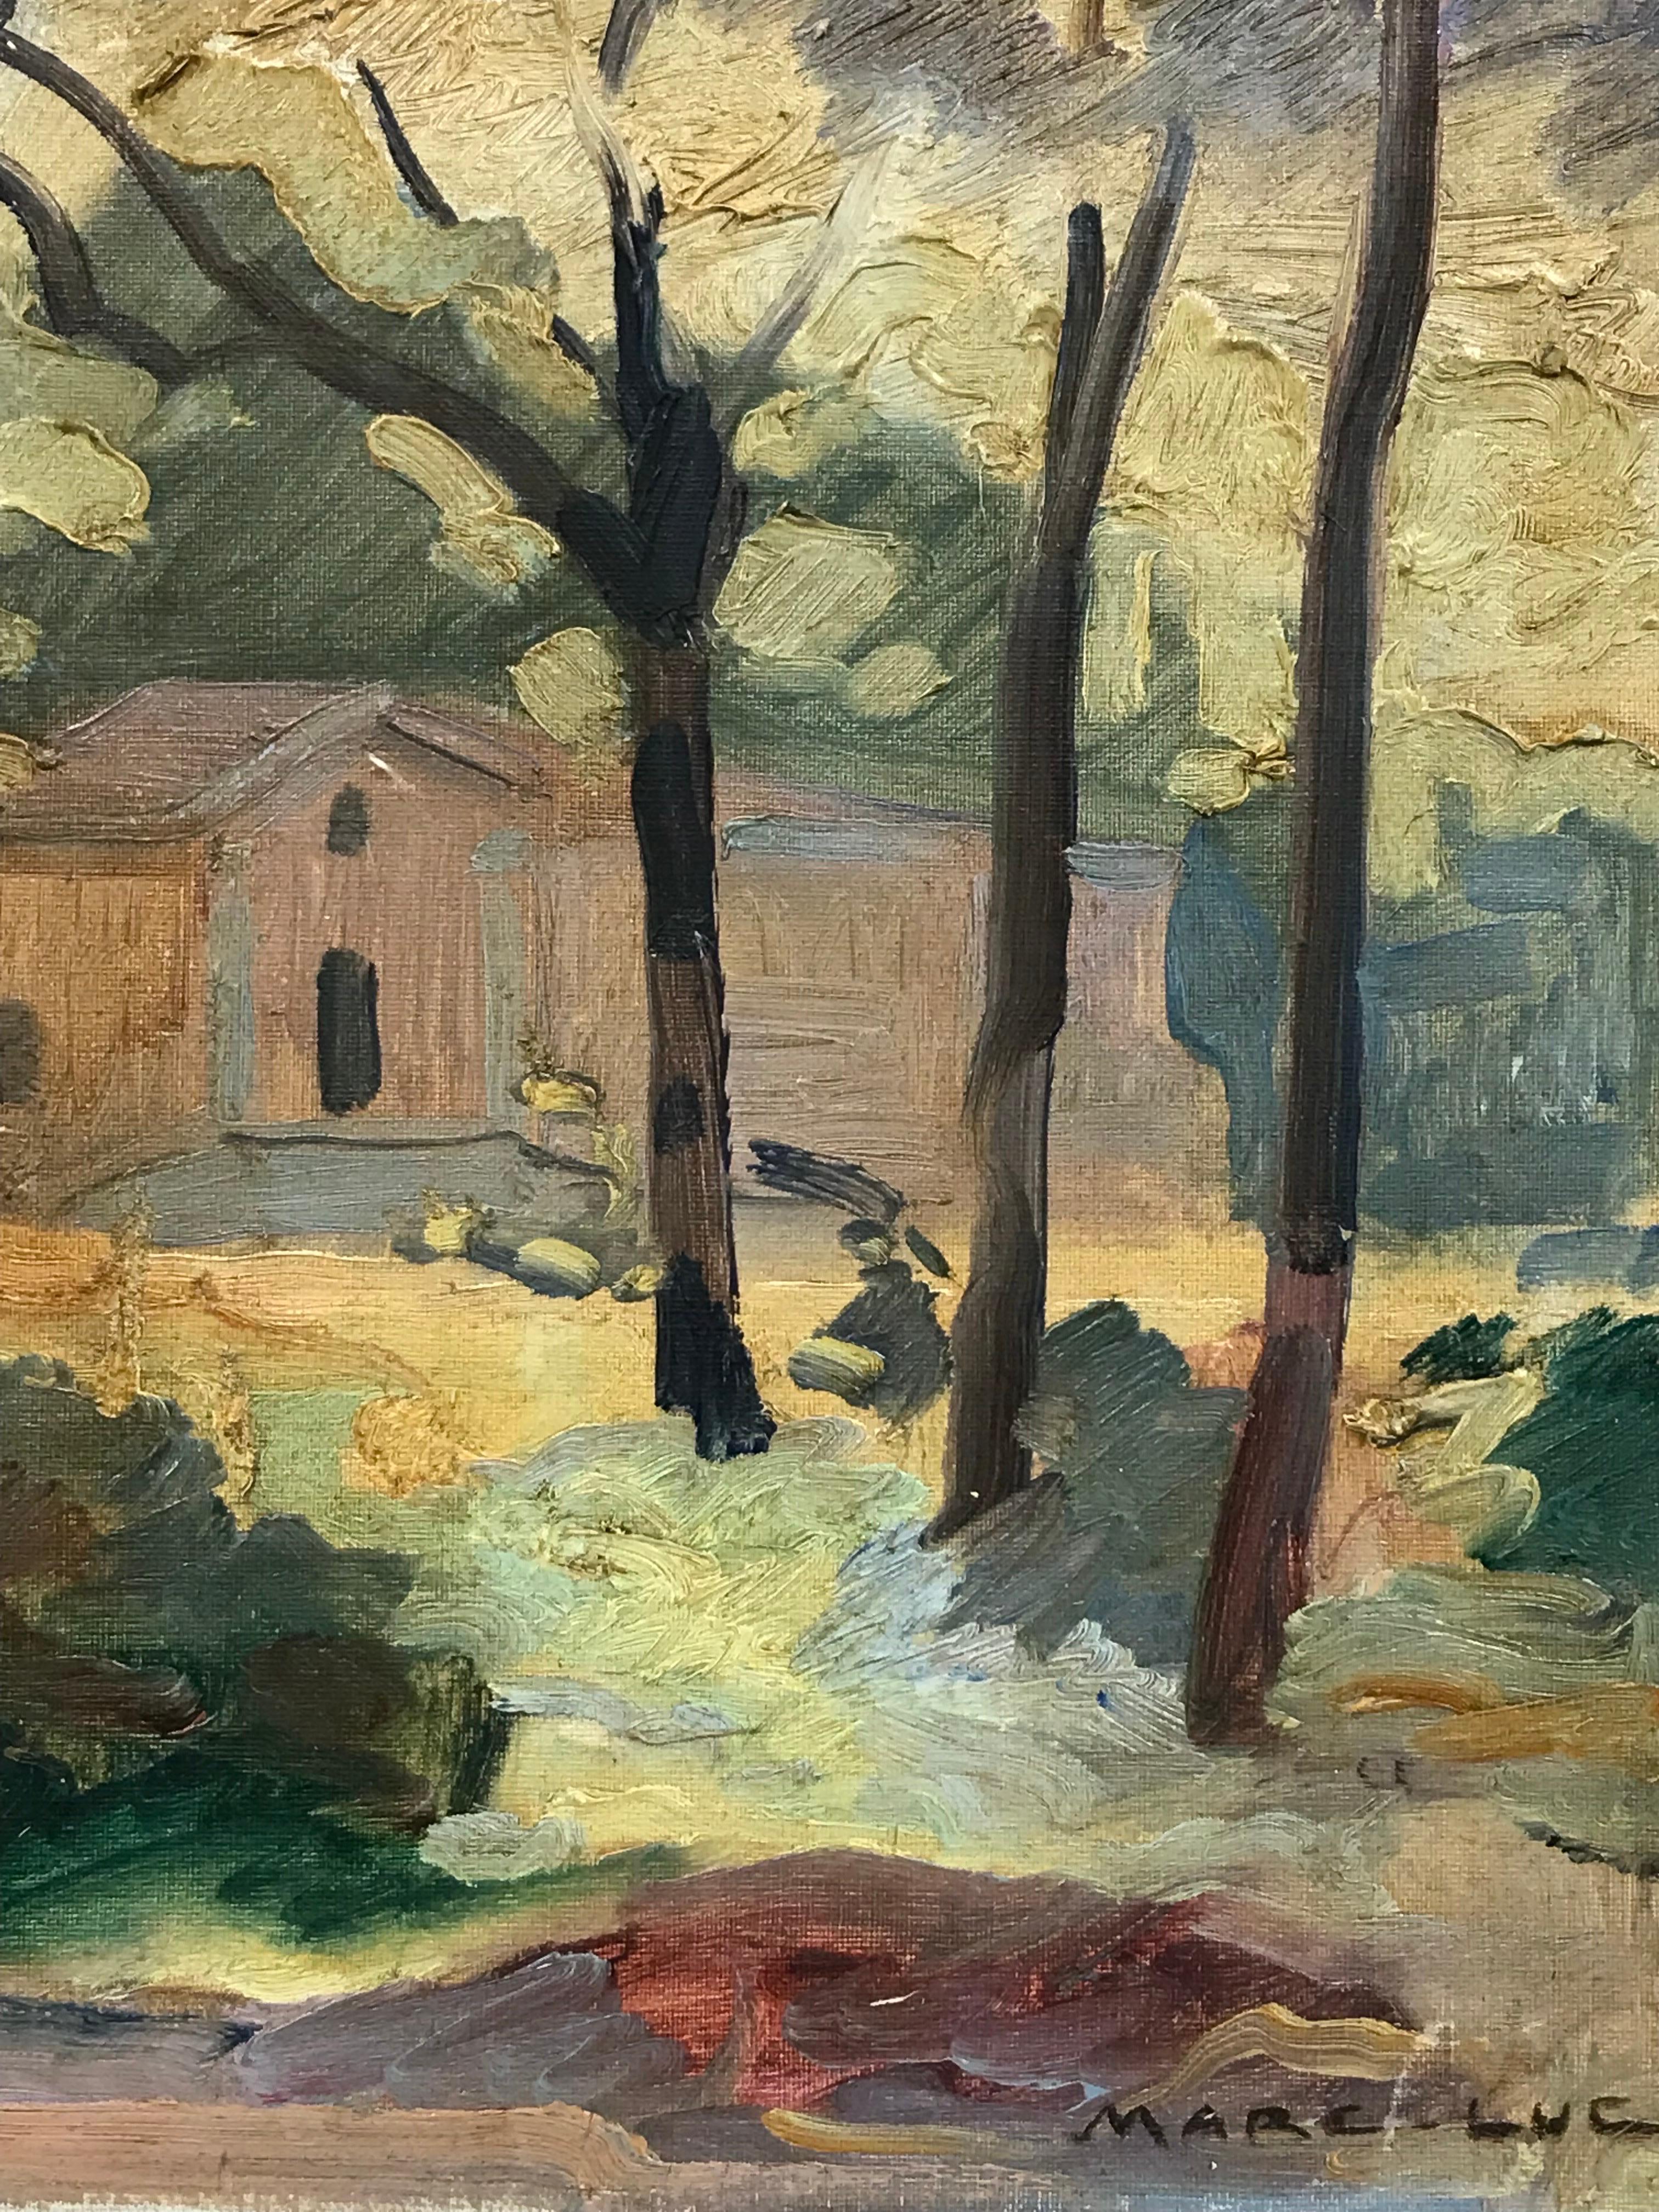 Artist/ School: French School, circa 1930's, inscribed verso.

Title: woodland landscape with house, inscribed verso

Medium: oil painting on canvas, unframed, 

canvas: 15 x 18 inches

Provenance: private collection, France

Condition: The painting